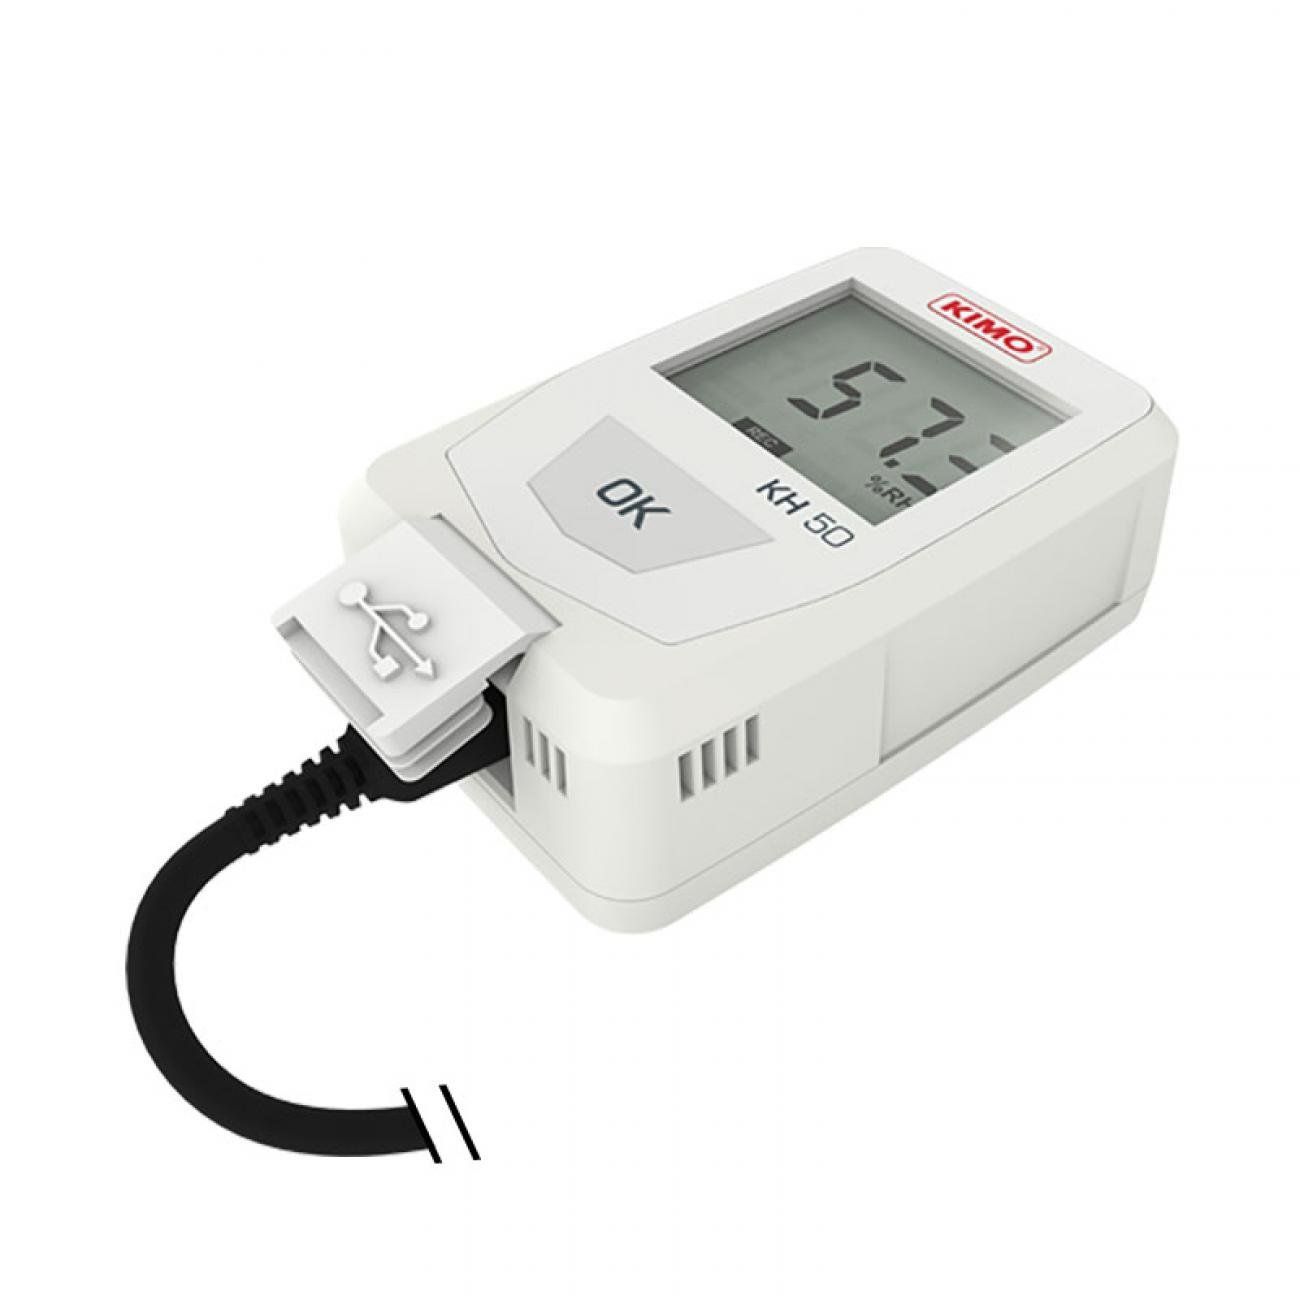 KT50 Data logger with USB cable for fast download of data